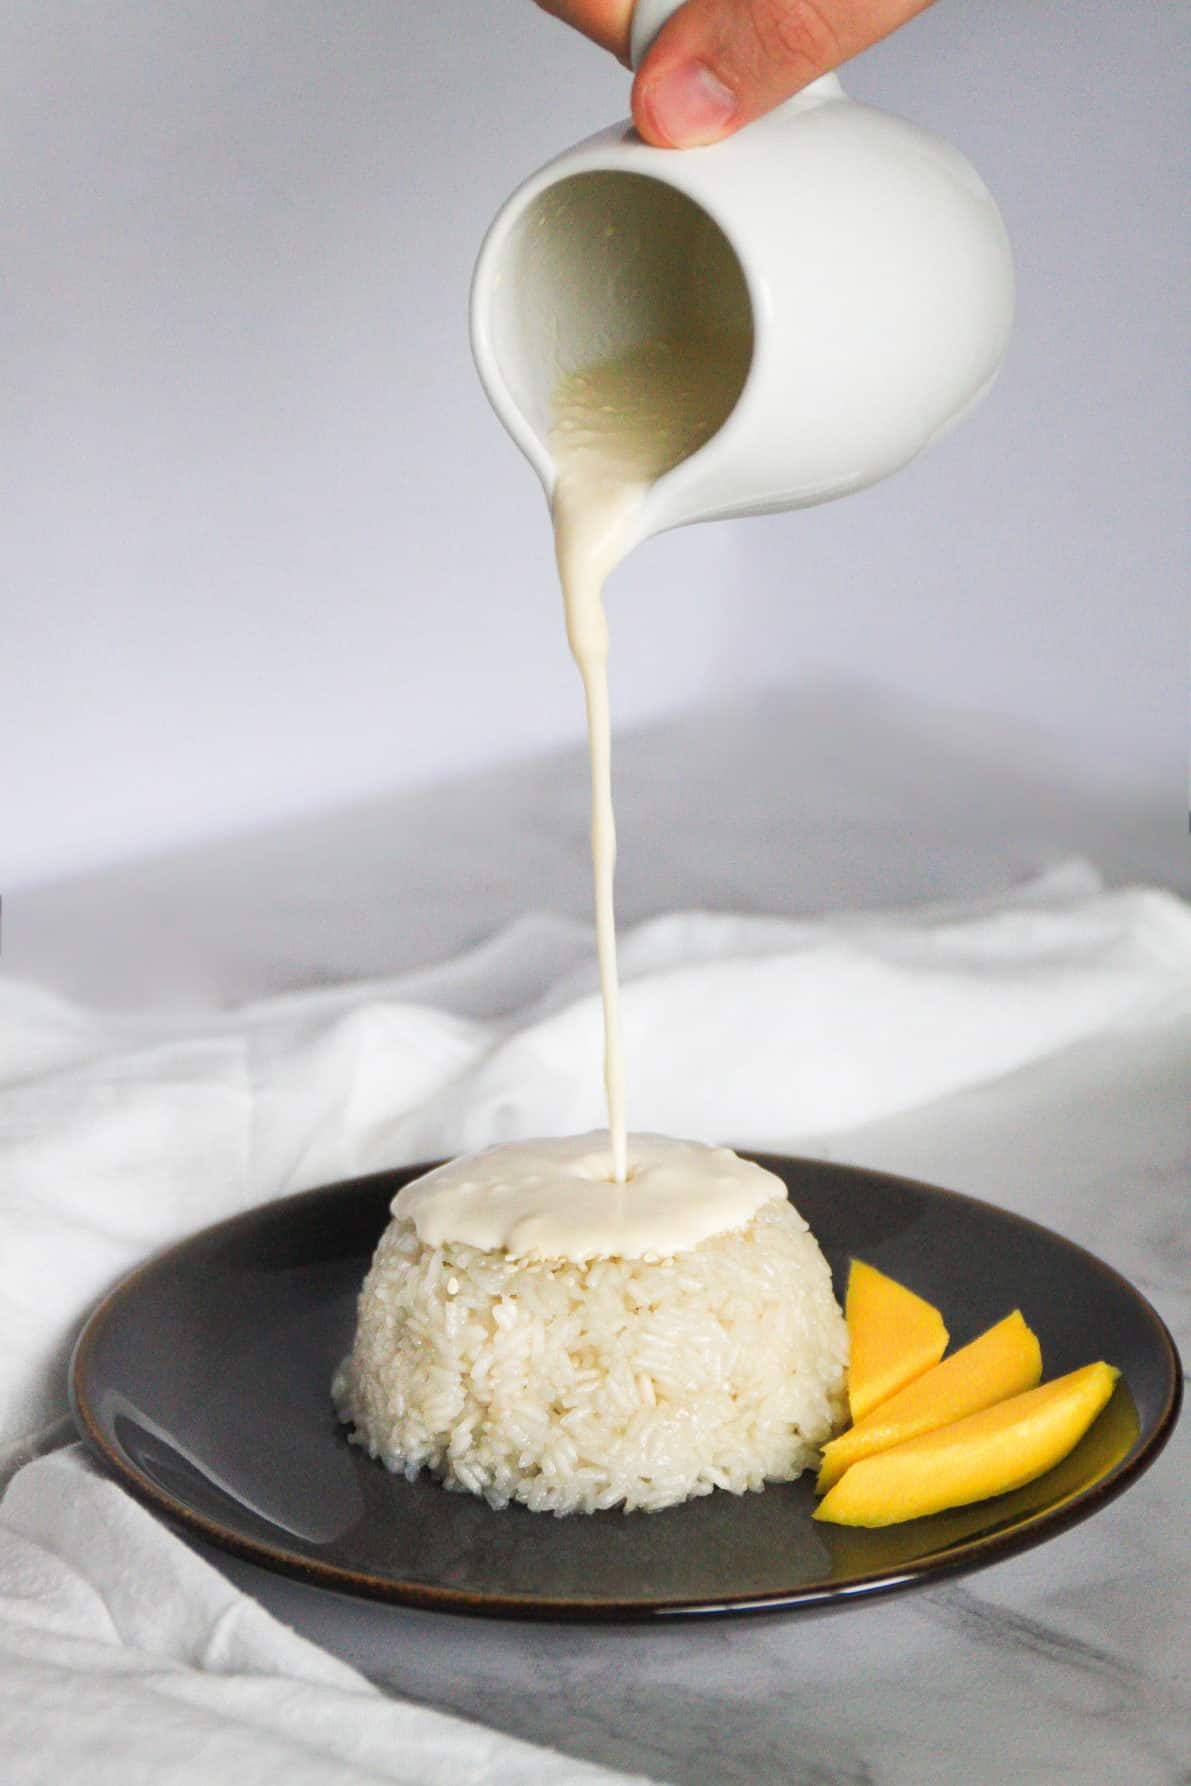 Thai Mango Sticky Rice with a hand pouring sugar syrup on top.